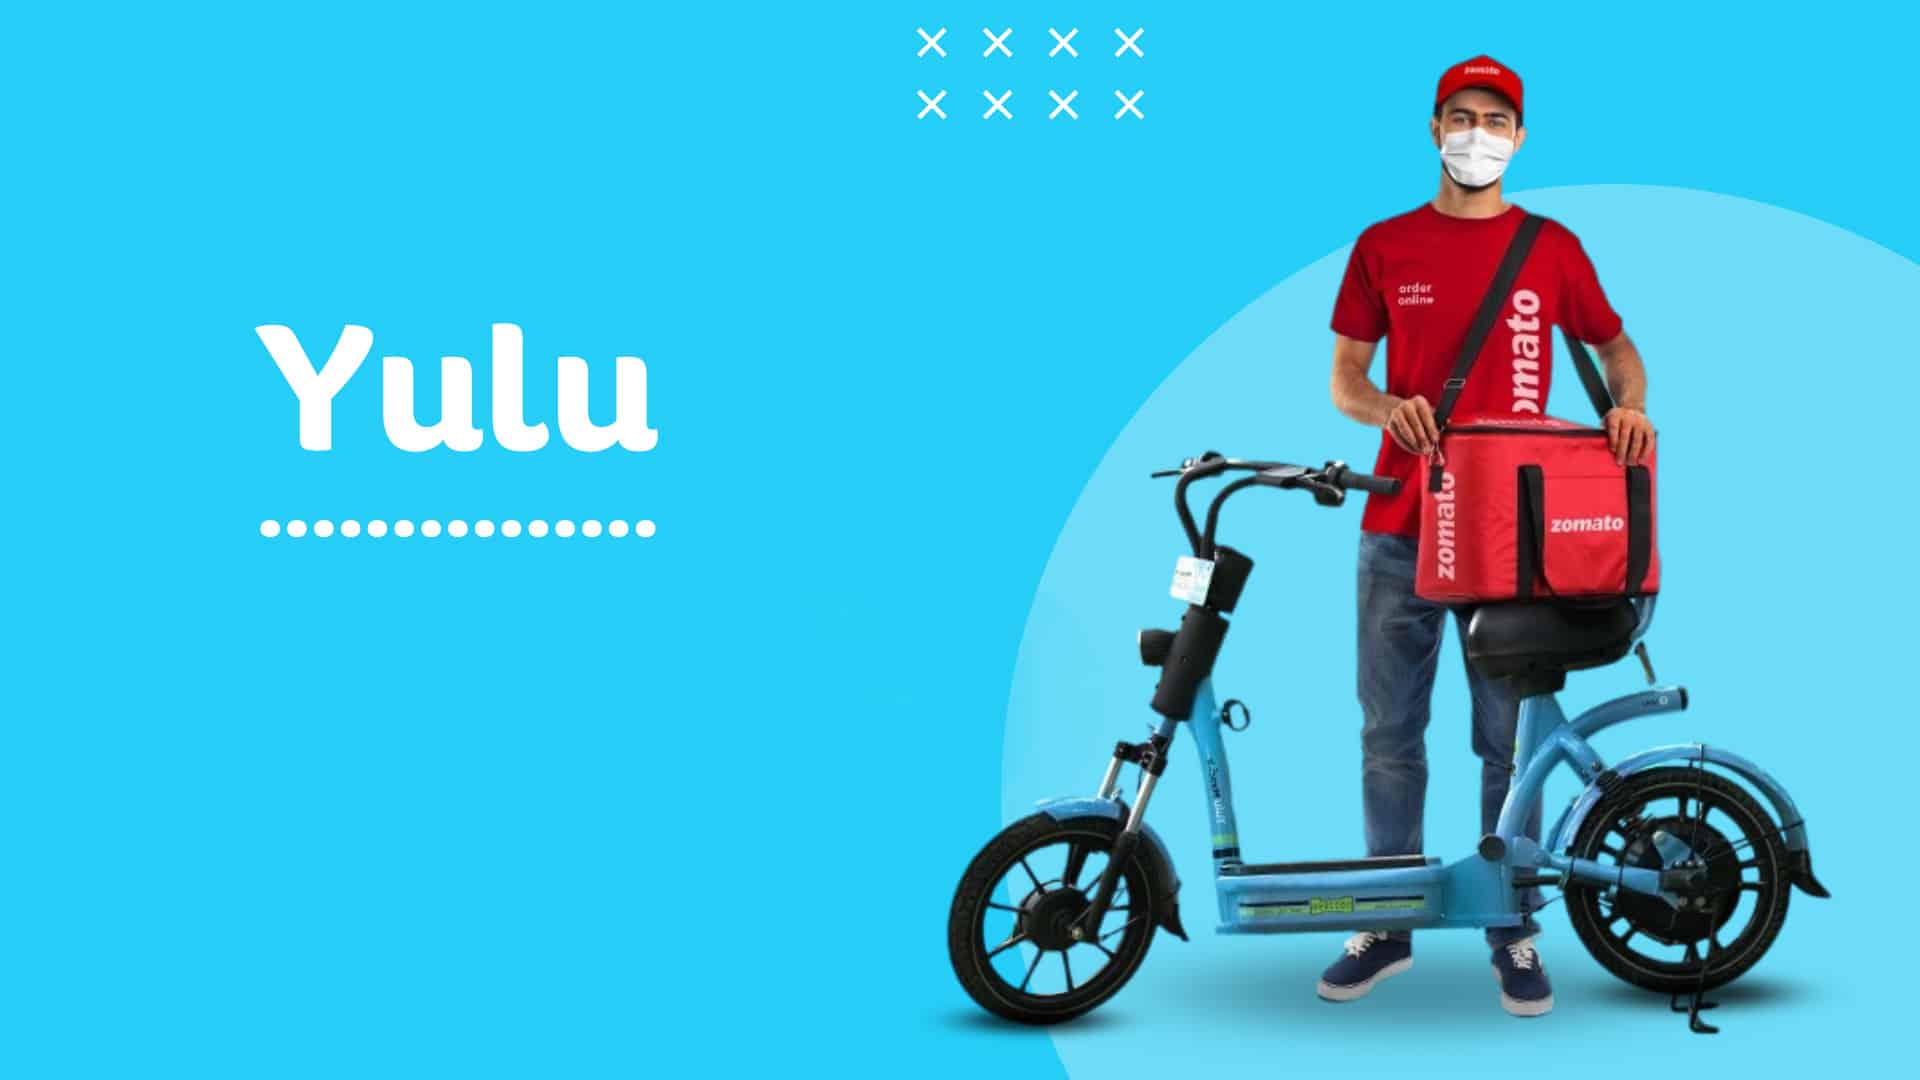 Yulu ties up with Zomato to provide e-scooter for food deliveries